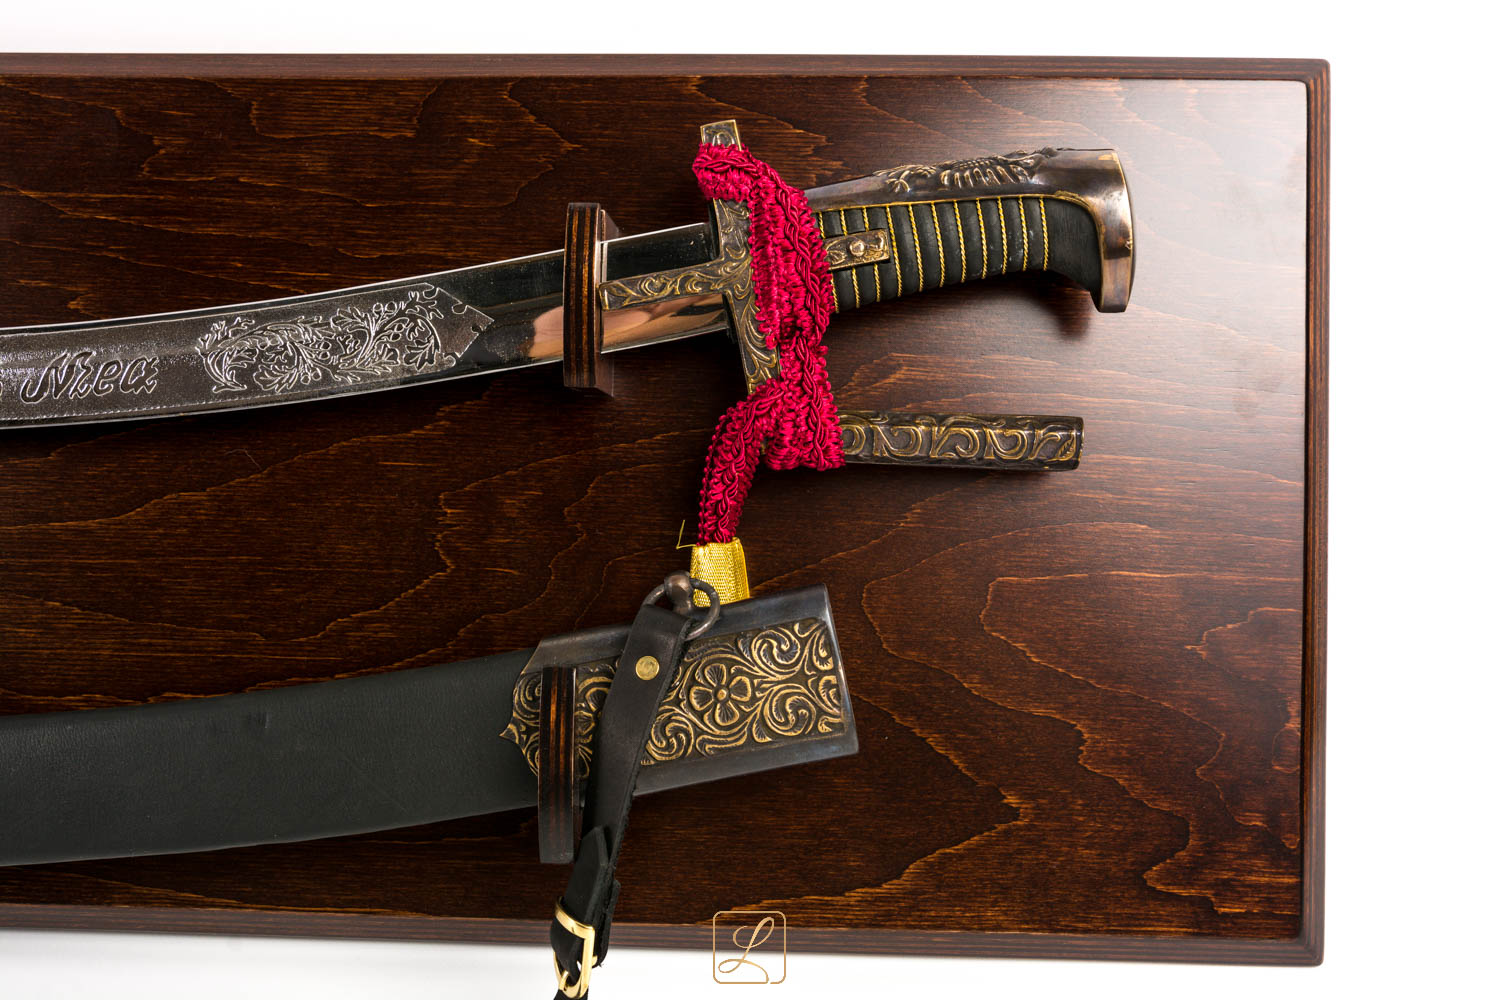 Polish Hussar saber from the first half 17th century, chrome version with scabbard on a hanging table - replica